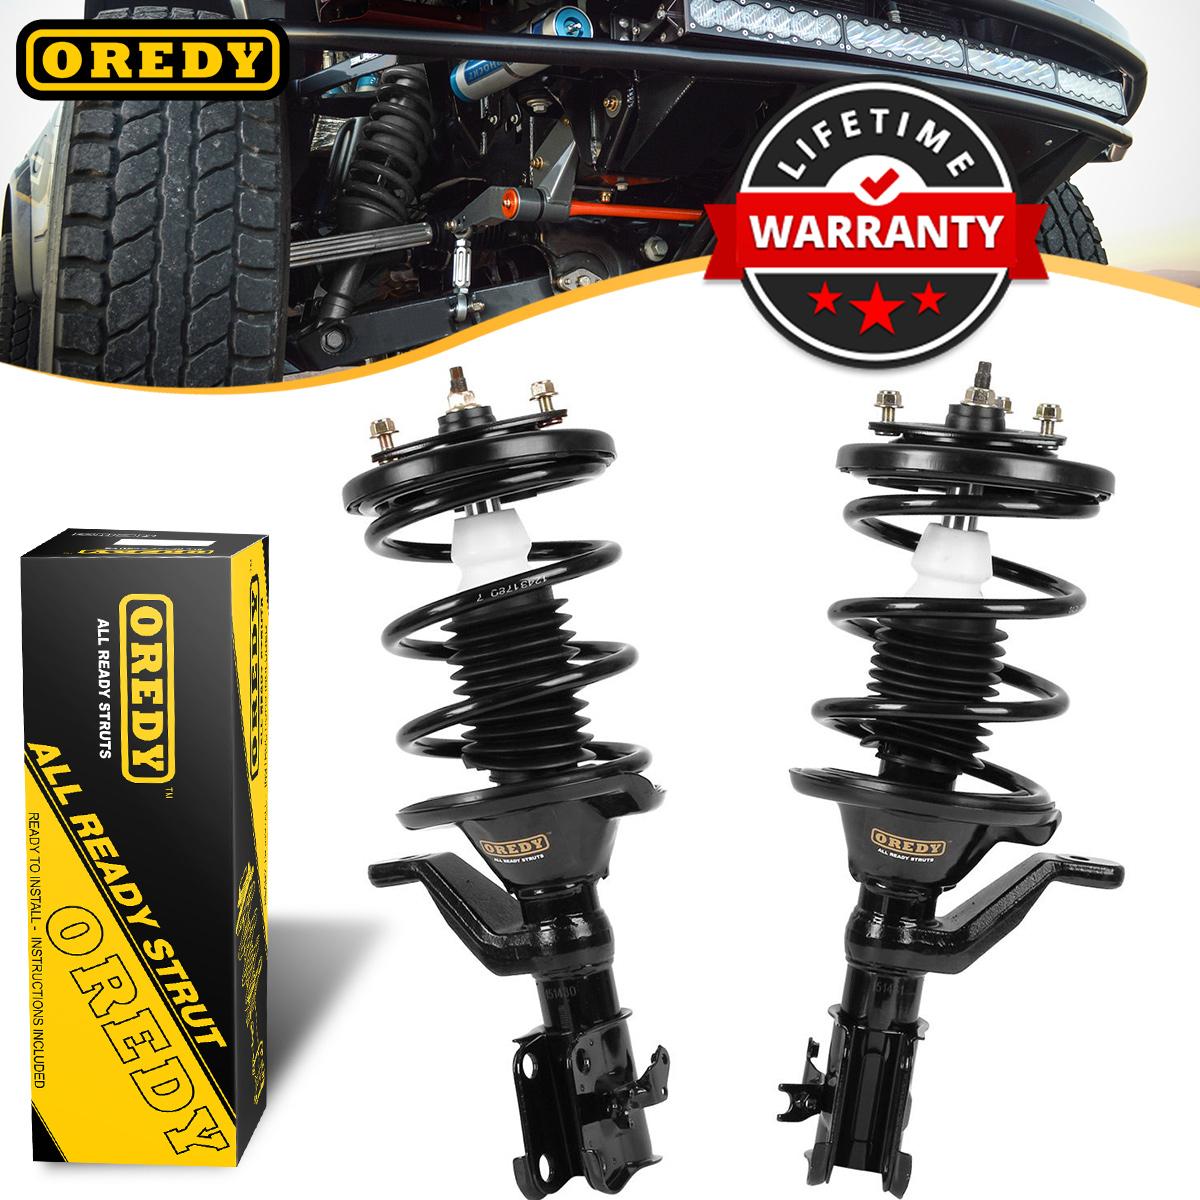 2 New Honda Civic Front Complete Struts Lifetime Warranty Free Shipping